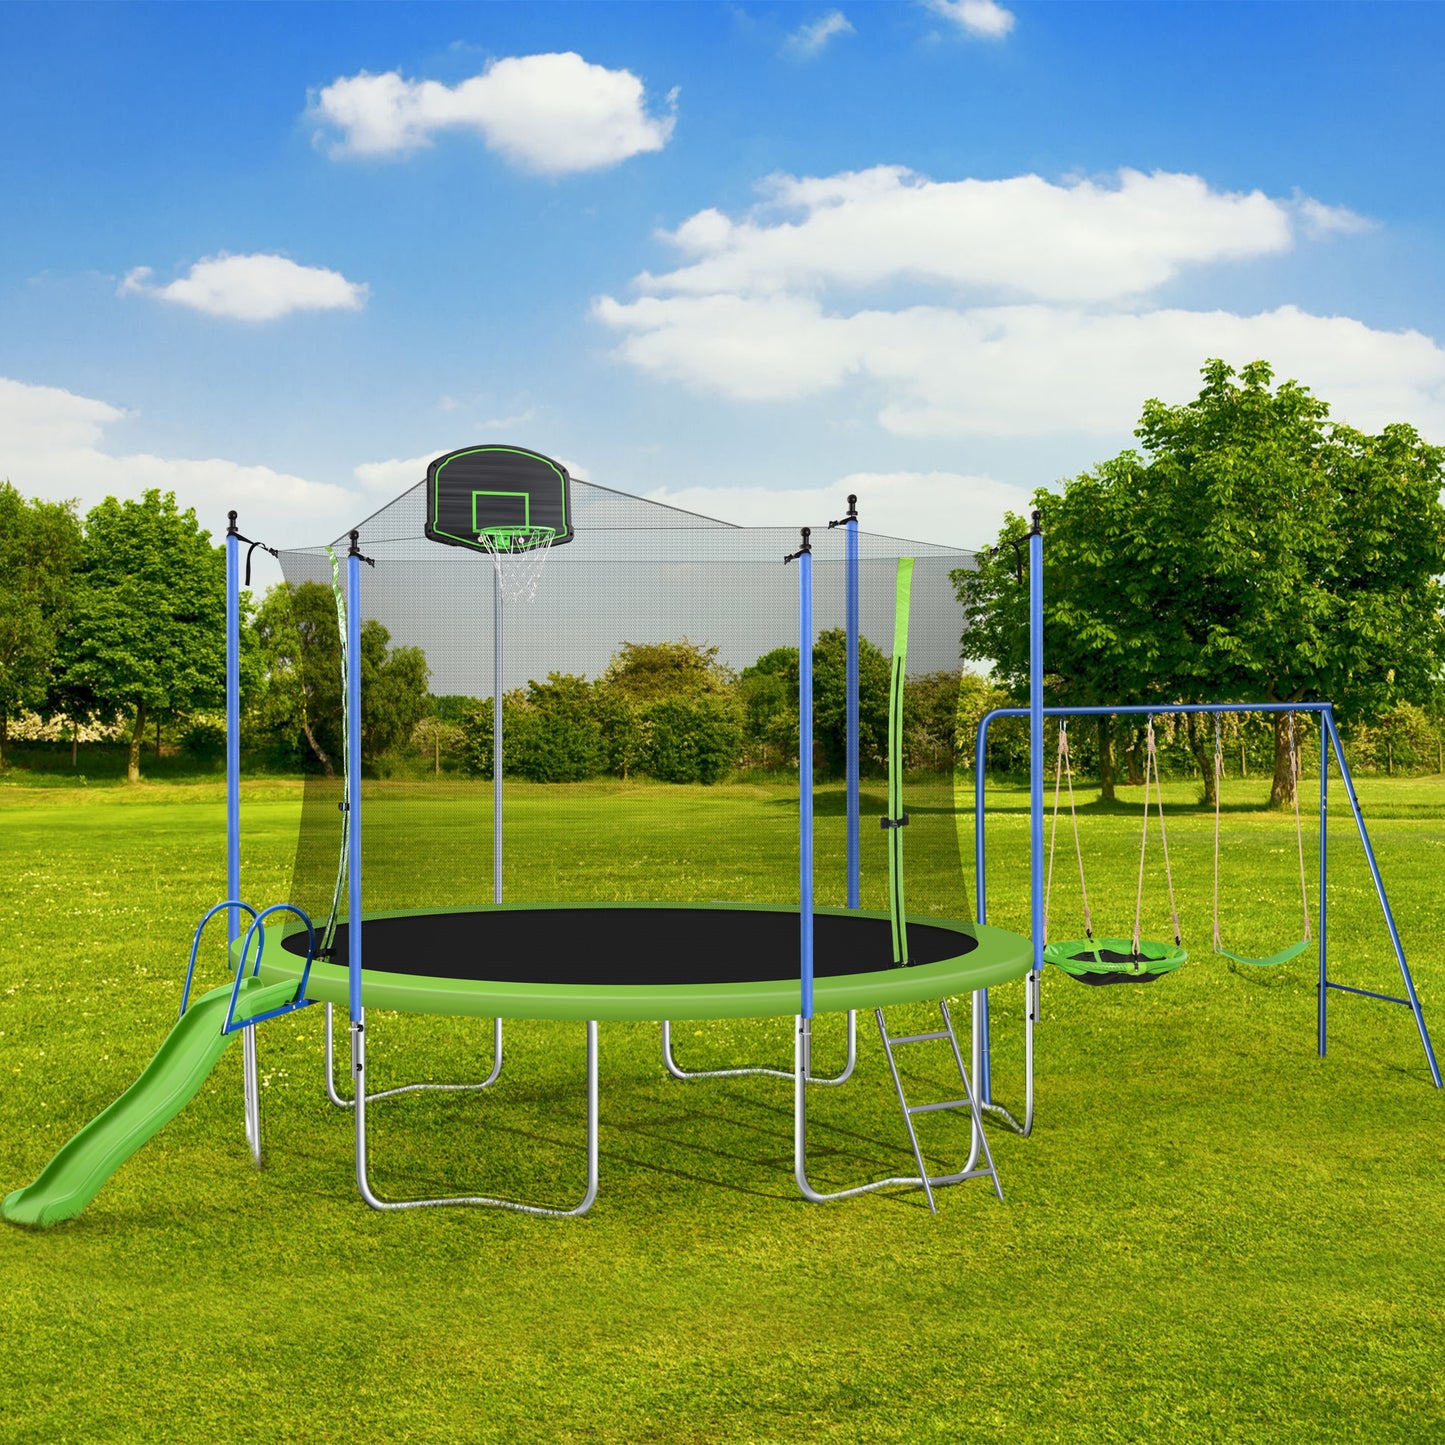 Trampoline and Swing Set, 12FT Trampoline with Slide, Basketball Hoop and Enclosure Net, Outdoor Jumping Fitness Trampoline for Yard, Patio, School, Recreational Trampoline for Kids/Adults, D7691